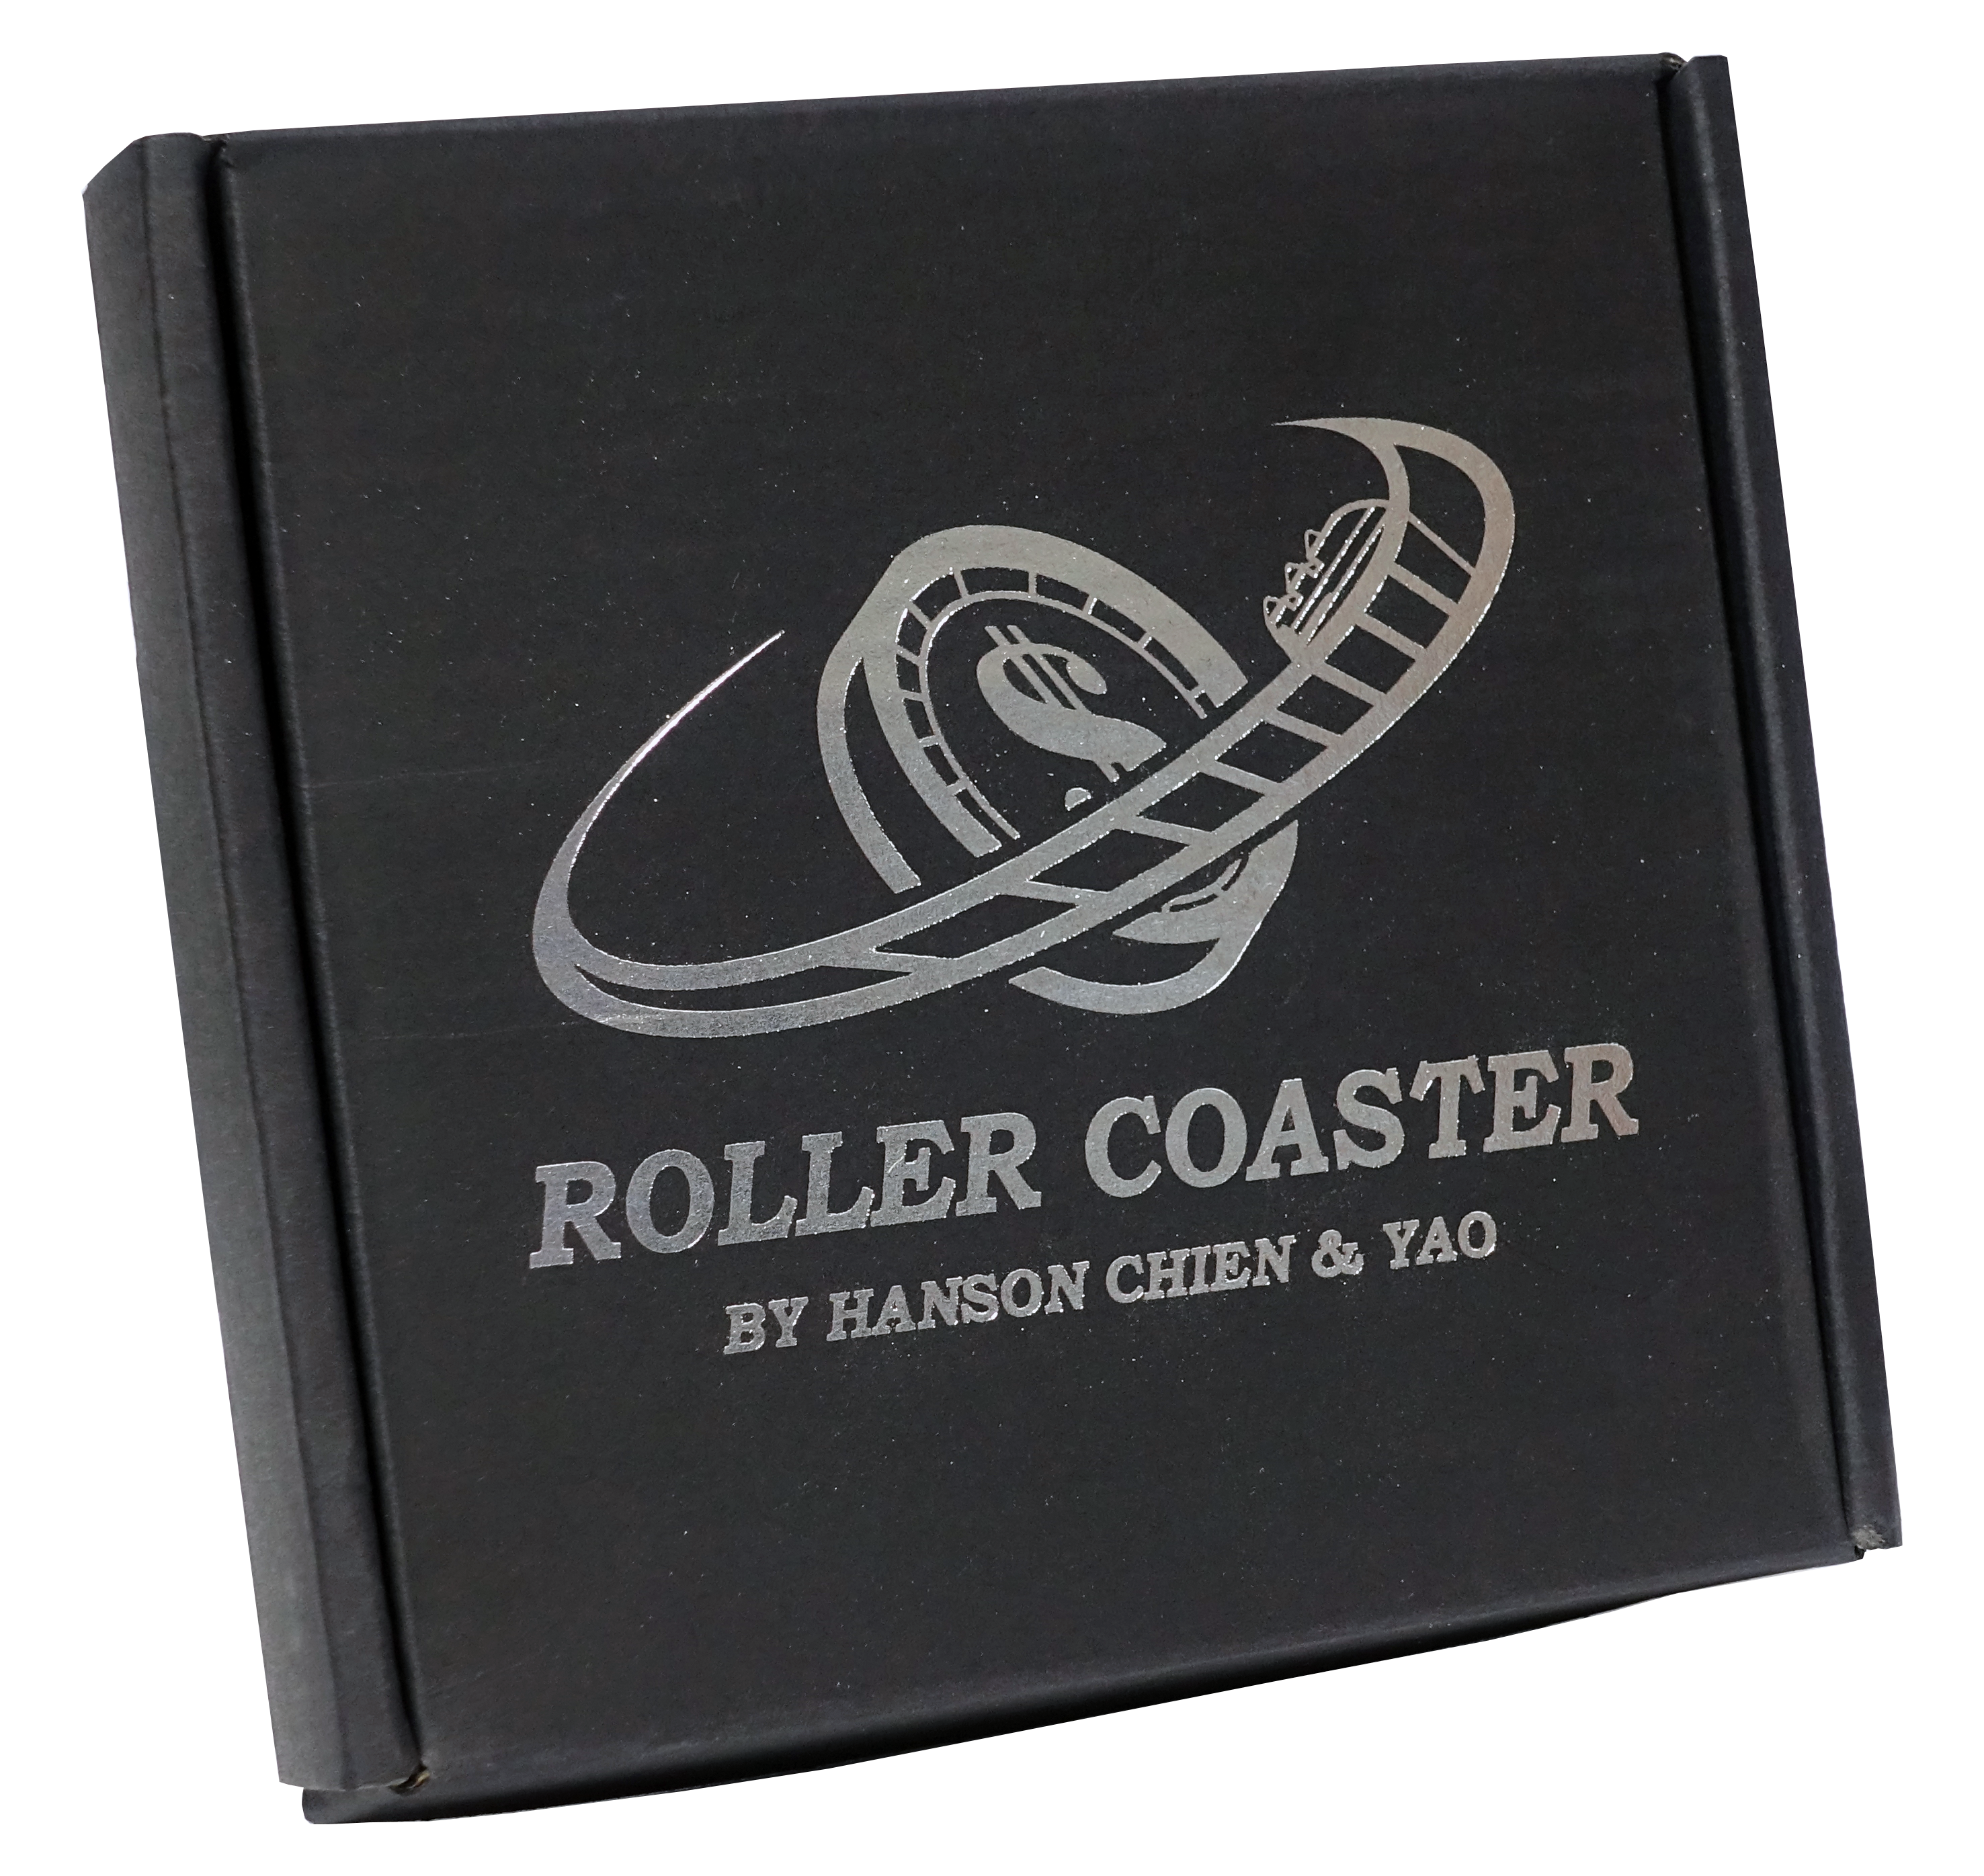 Details about   Refill for ROLLER COASTER COKE by Hanson Chien 